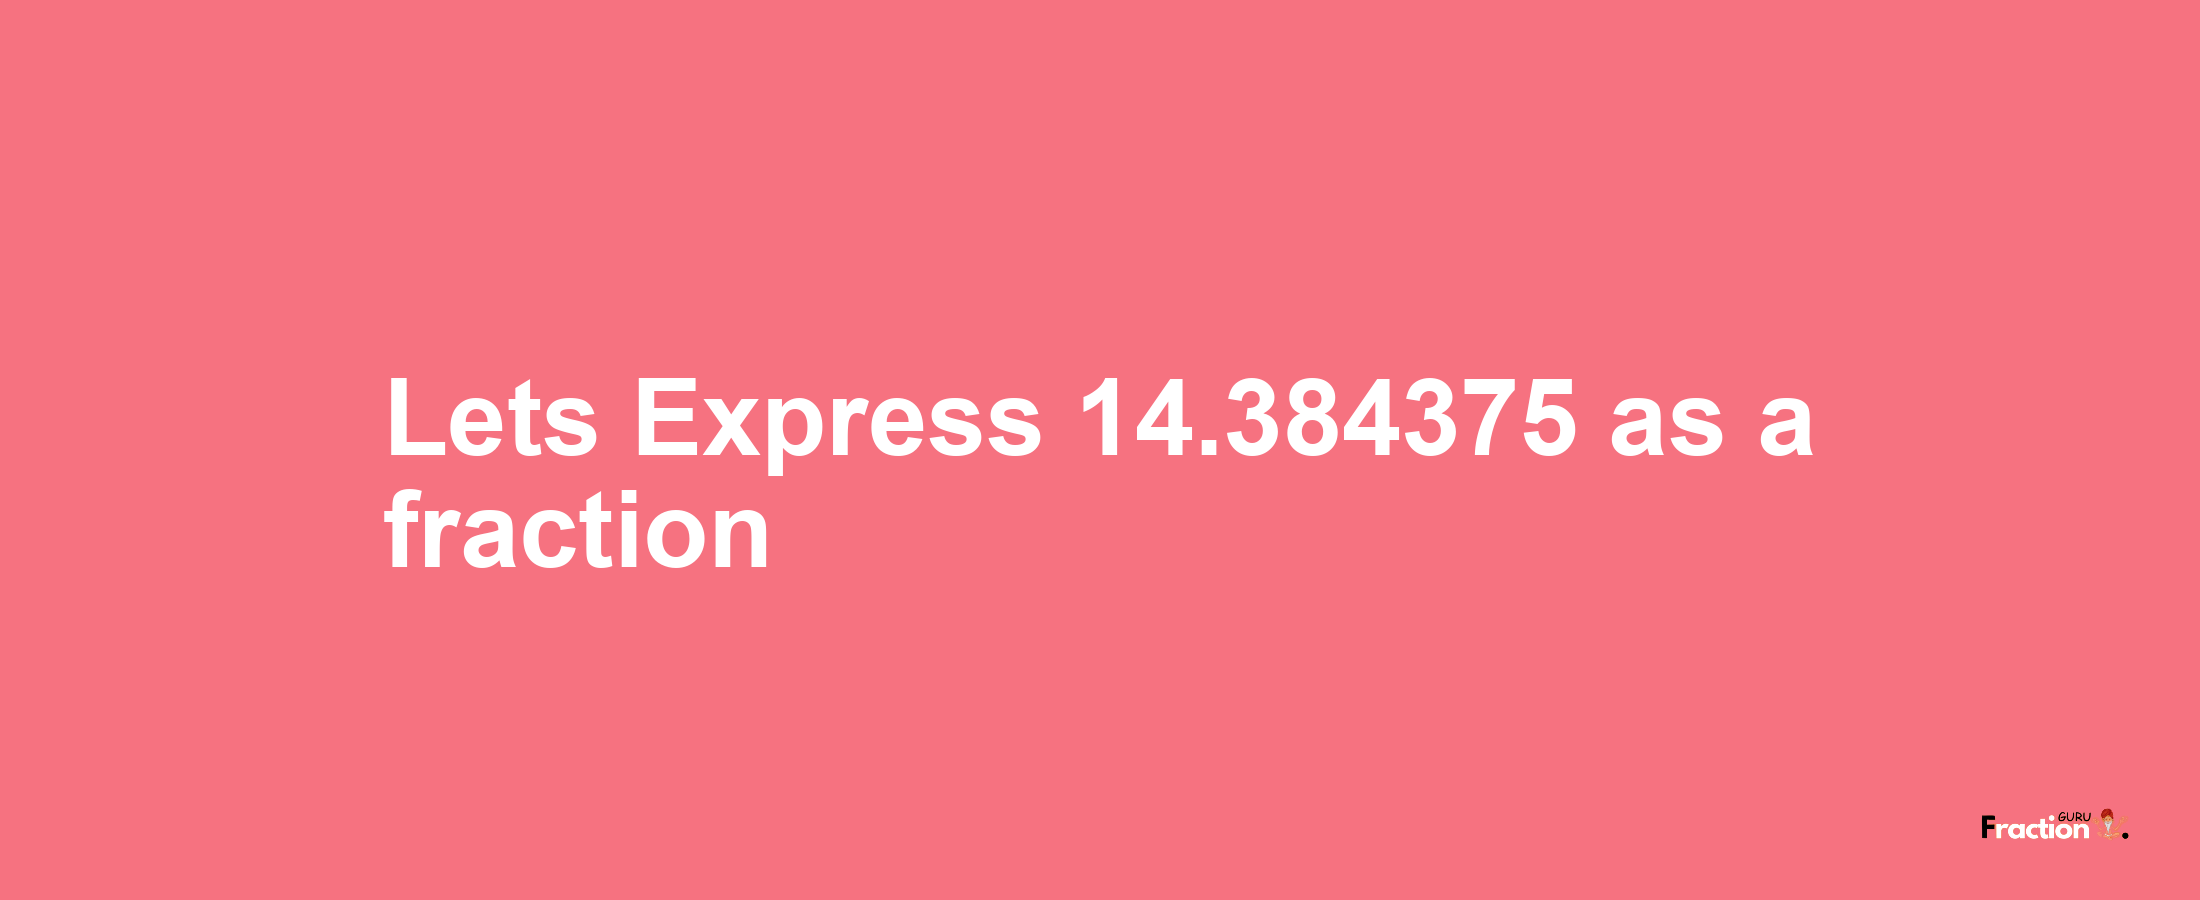 Lets Express 14.384375 as afraction